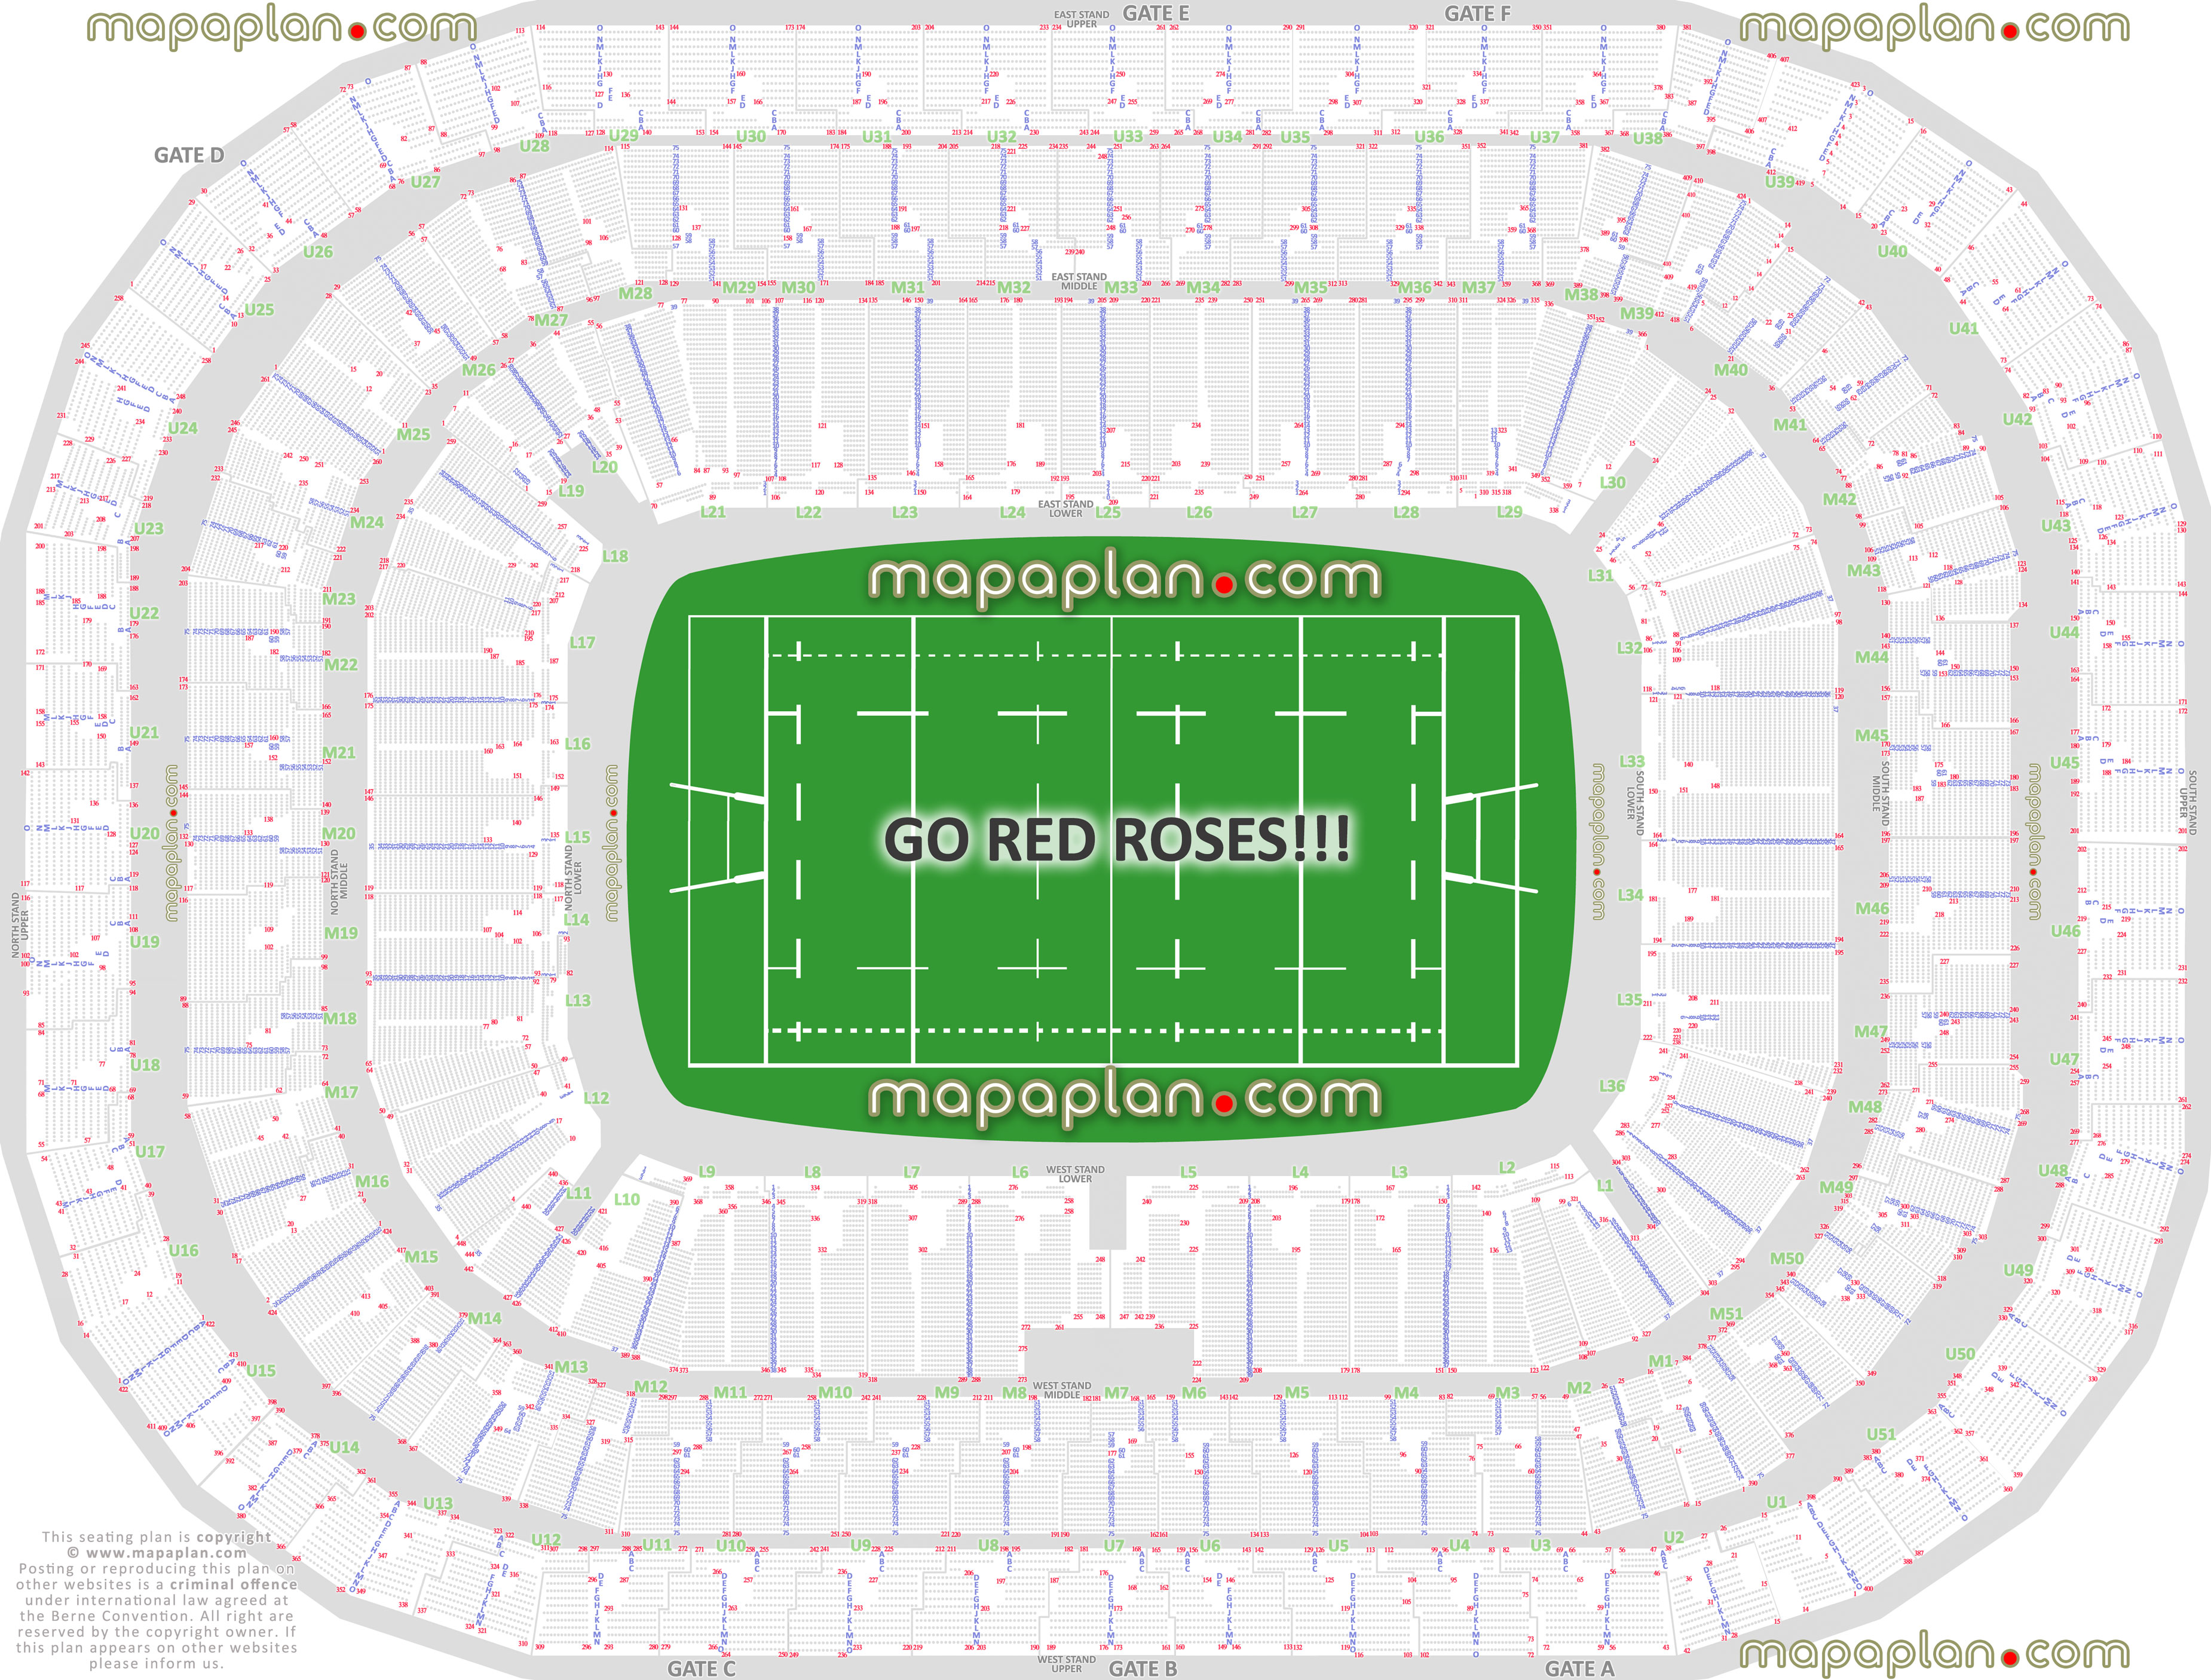 Twickenham Stadium Detailed Seat Row Numbers Rugby World Cup Floor Plan Sections Map With West East North South Stands Lower Middle Upper Tier Layout London